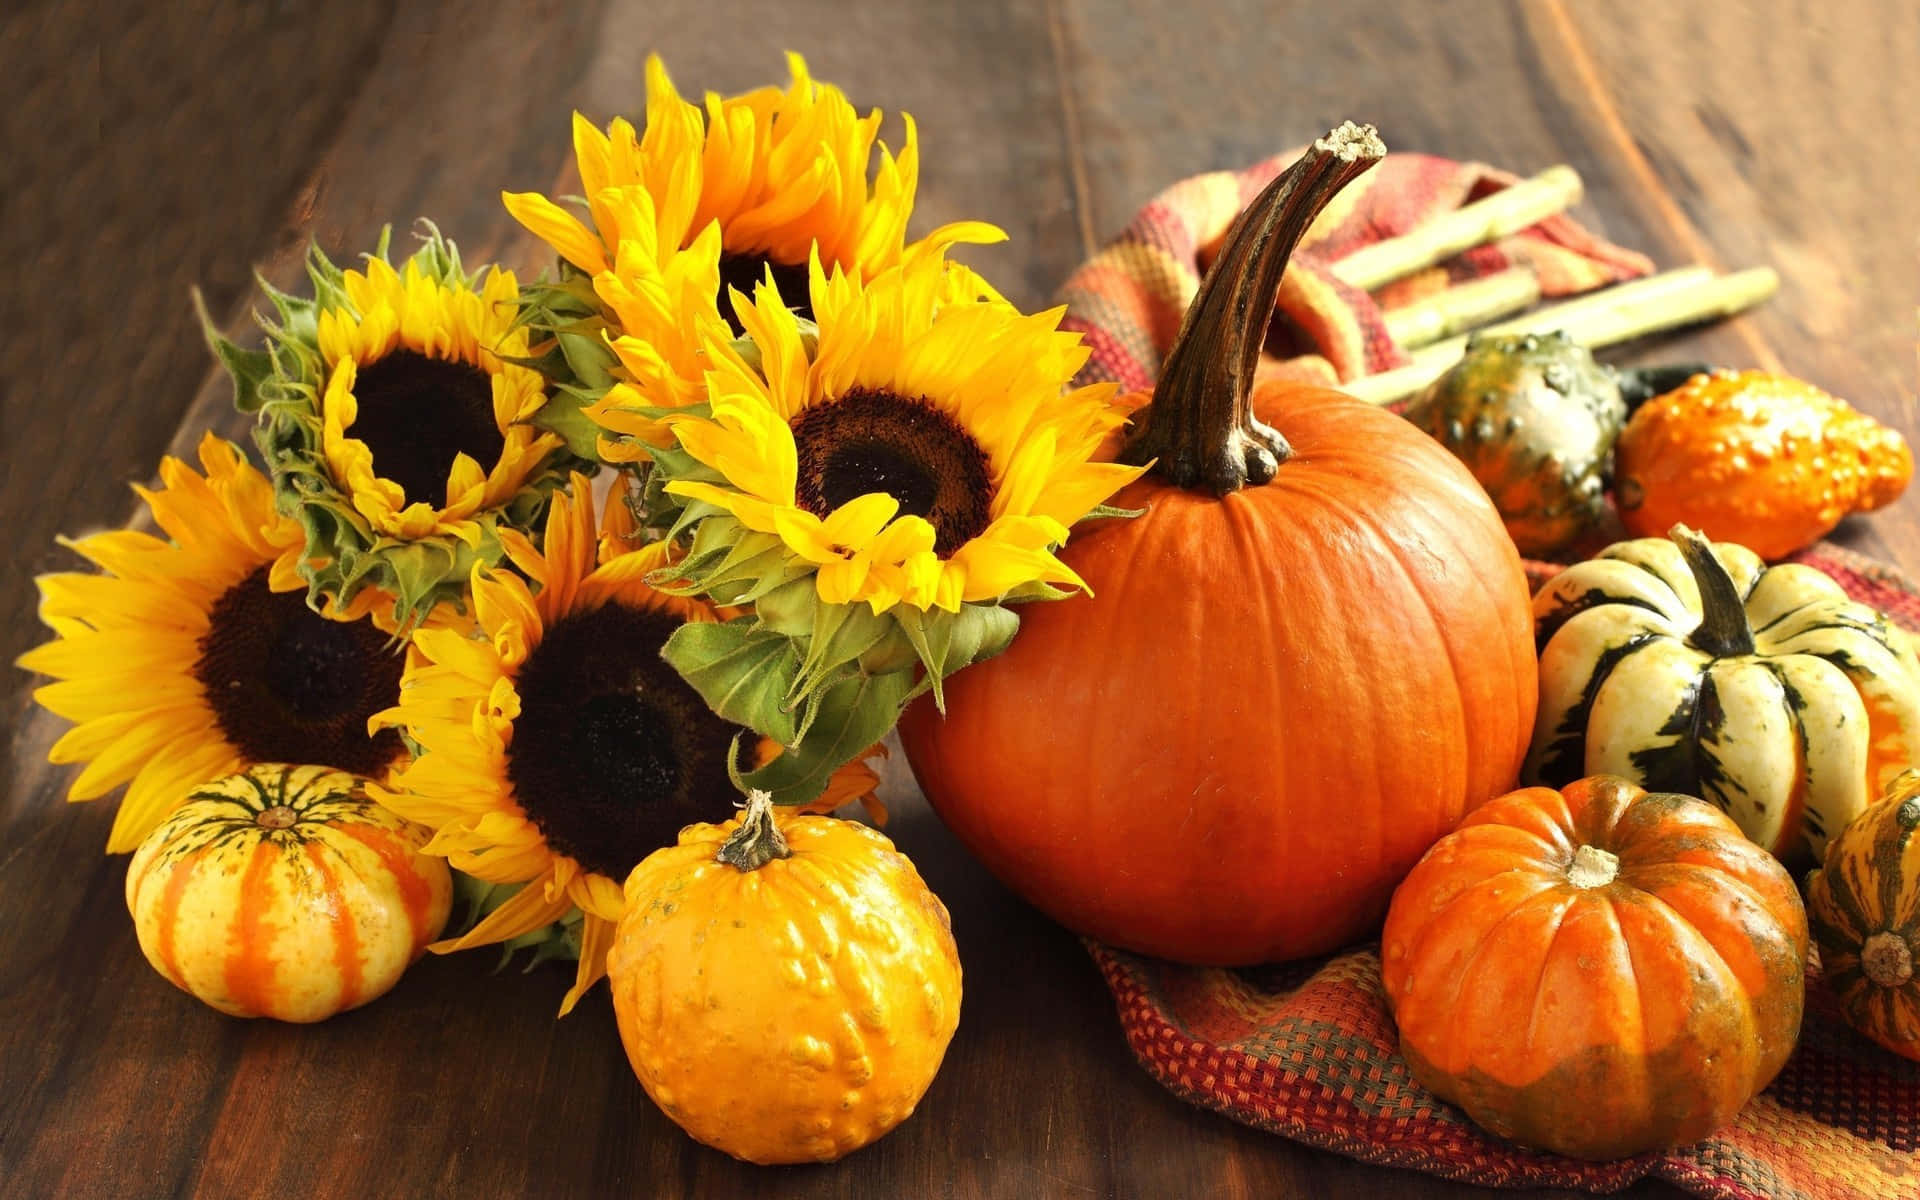 Captivating Fall Pumpkin Display on a Rustic Wooden Table